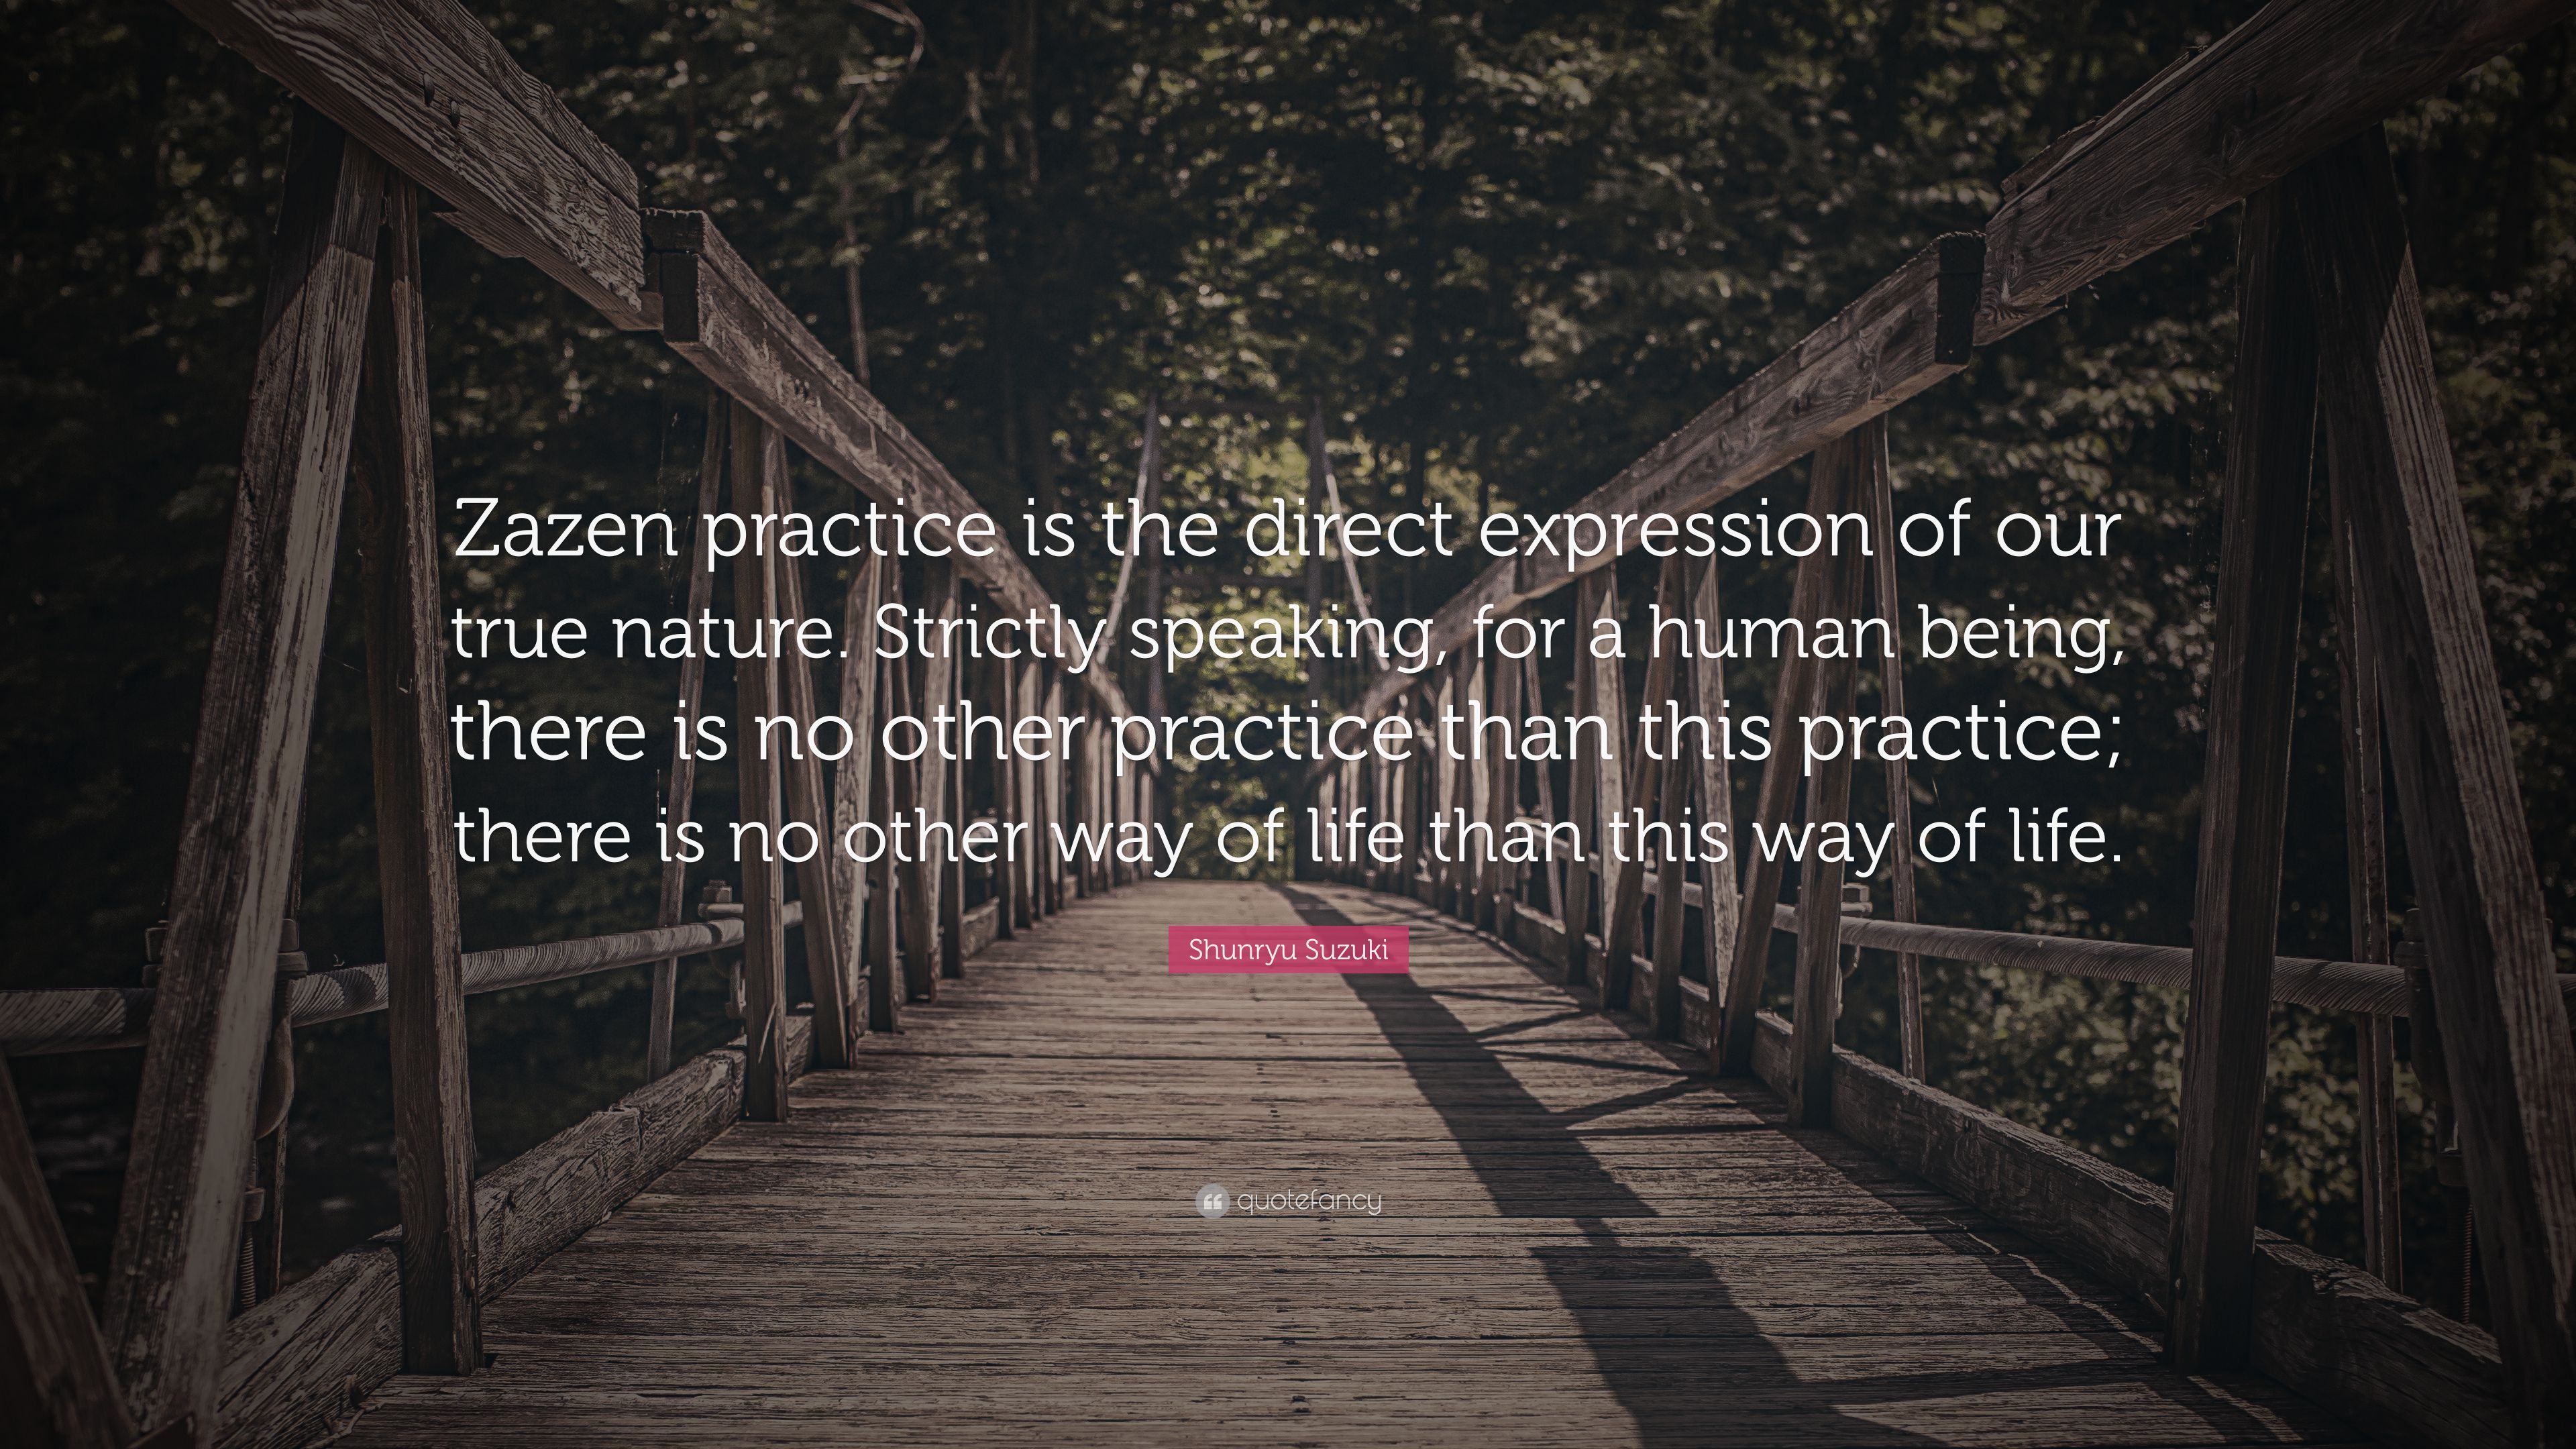 Shunryu Suzuki Quote: “Zazen practice is the direct expression of our true nature. Strictly speaking, for a human being, there is no other prac.” (7 wallpaper)